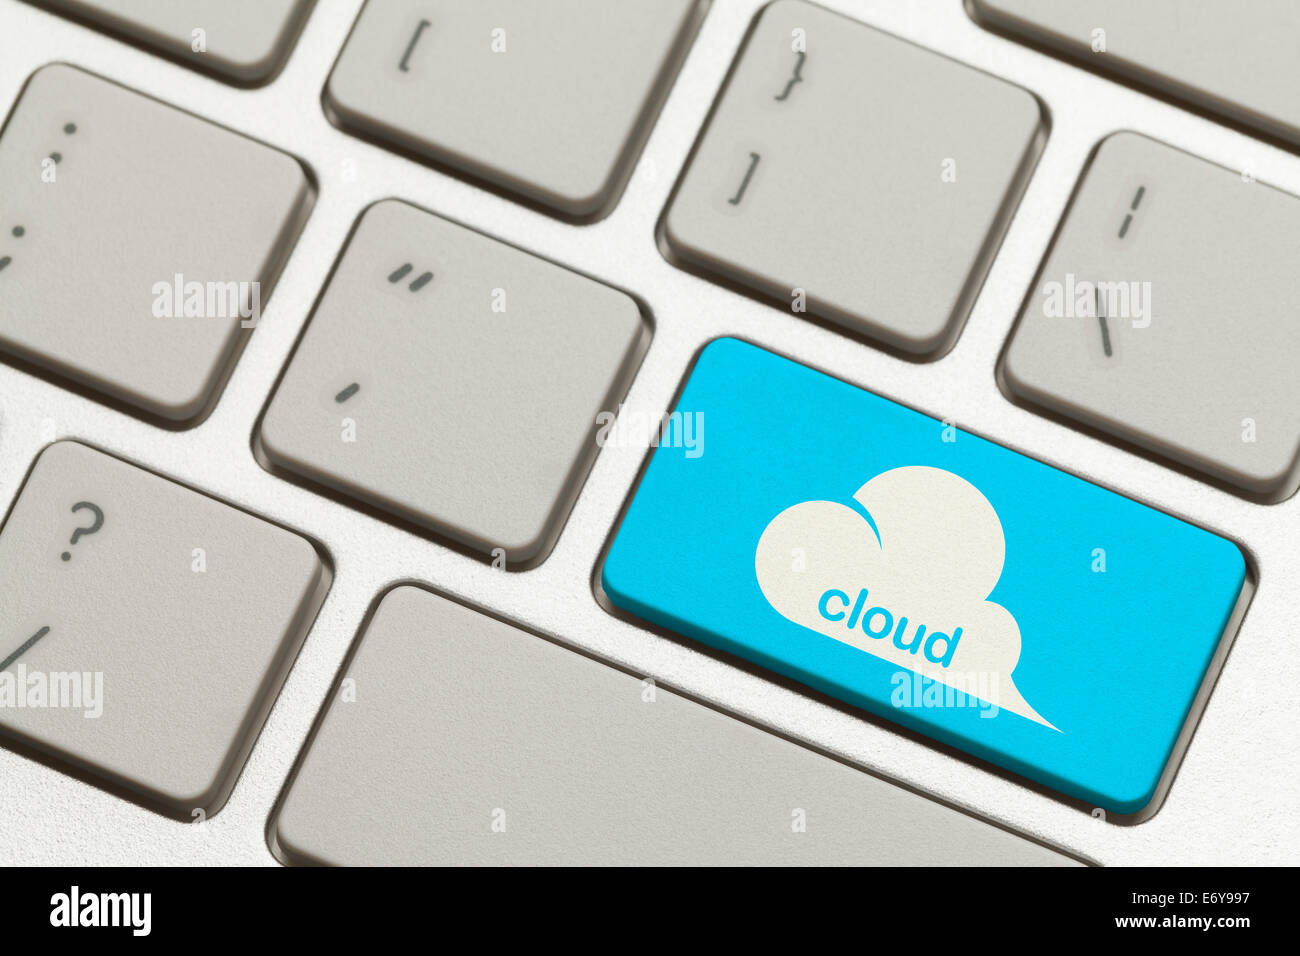 Close Up of Blue Cloud Key Button on Keyboard. Stock Photo